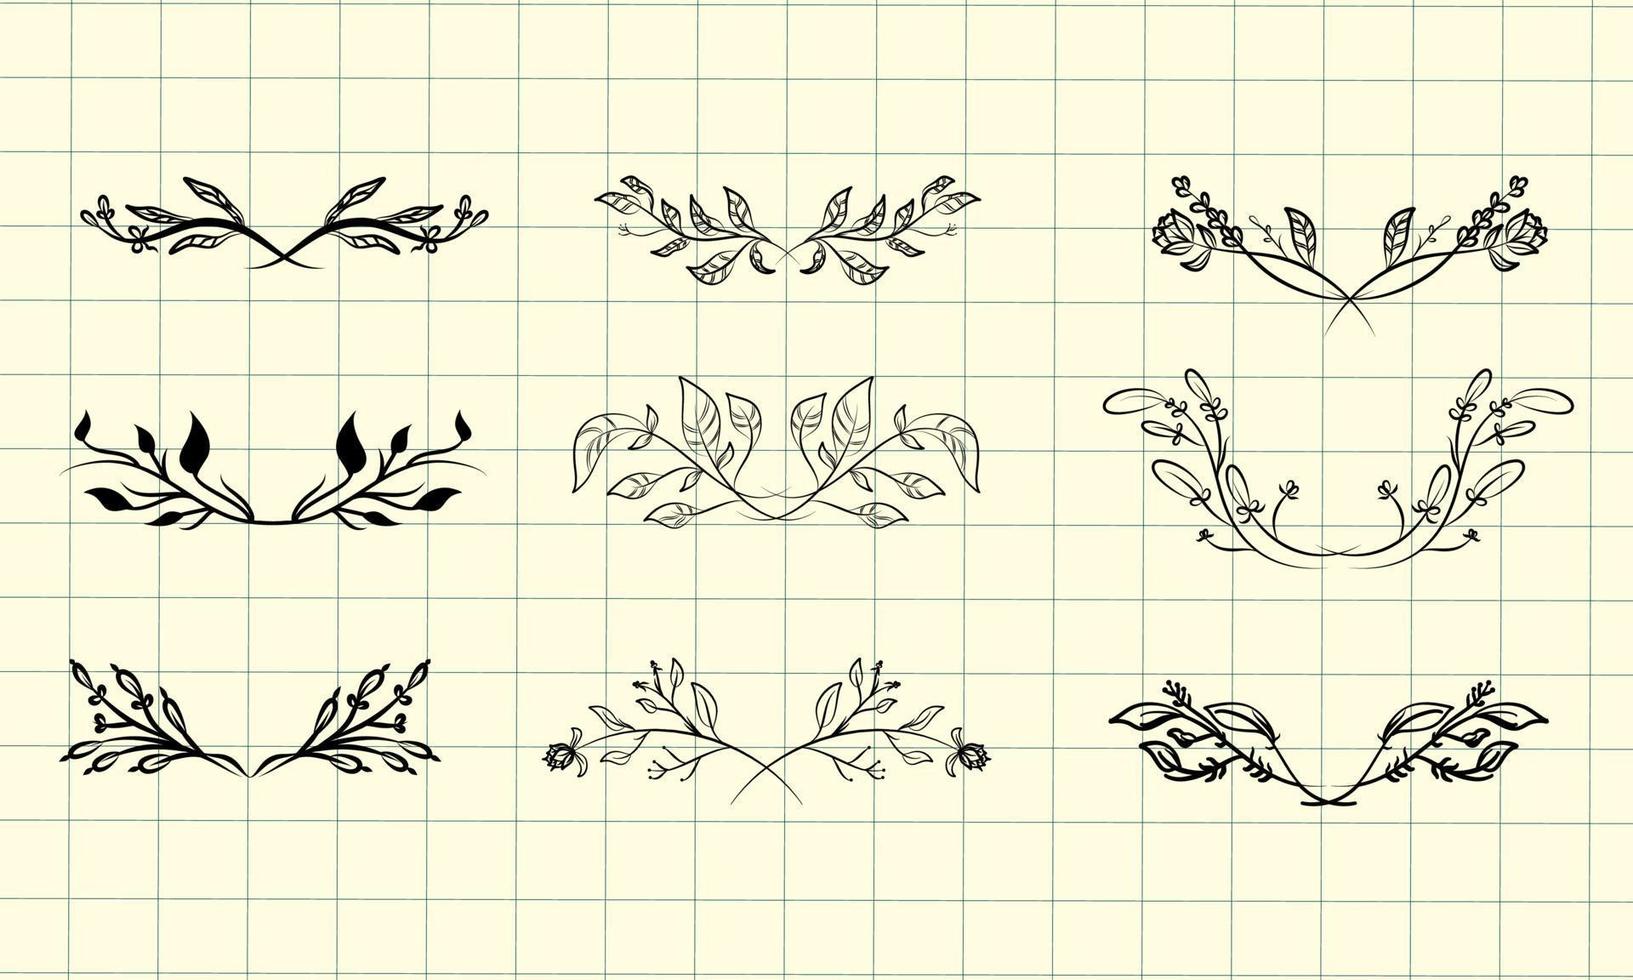 Hand drawn vintage floral borders, frames, dividers, corners with flowers and leaves. Trendy greenery elements in line art style. Vector for label, corporate identity, wedding invitation, card